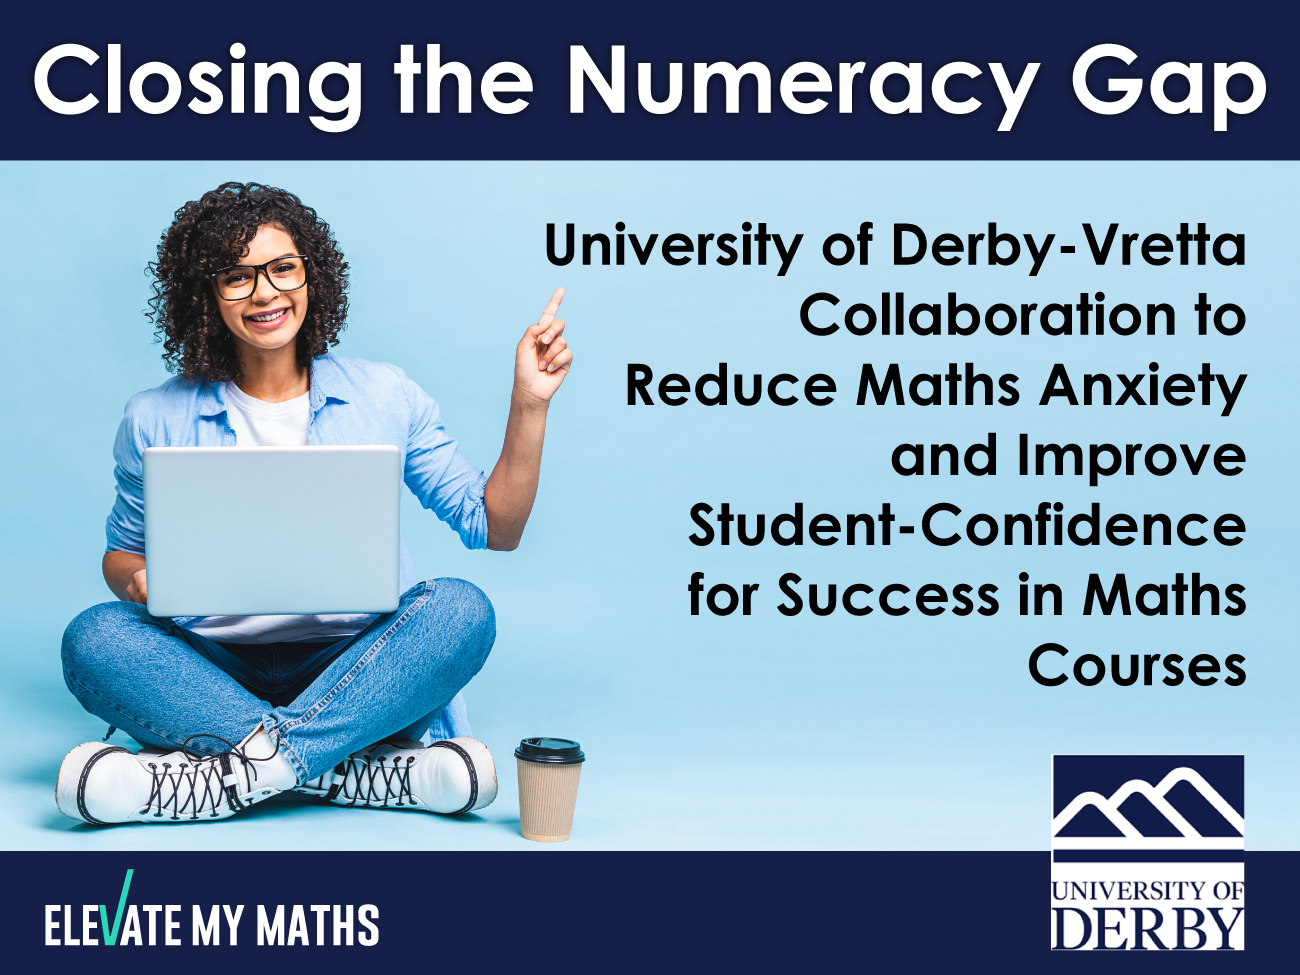 Closing the Numeracy Gap at the University of Derby